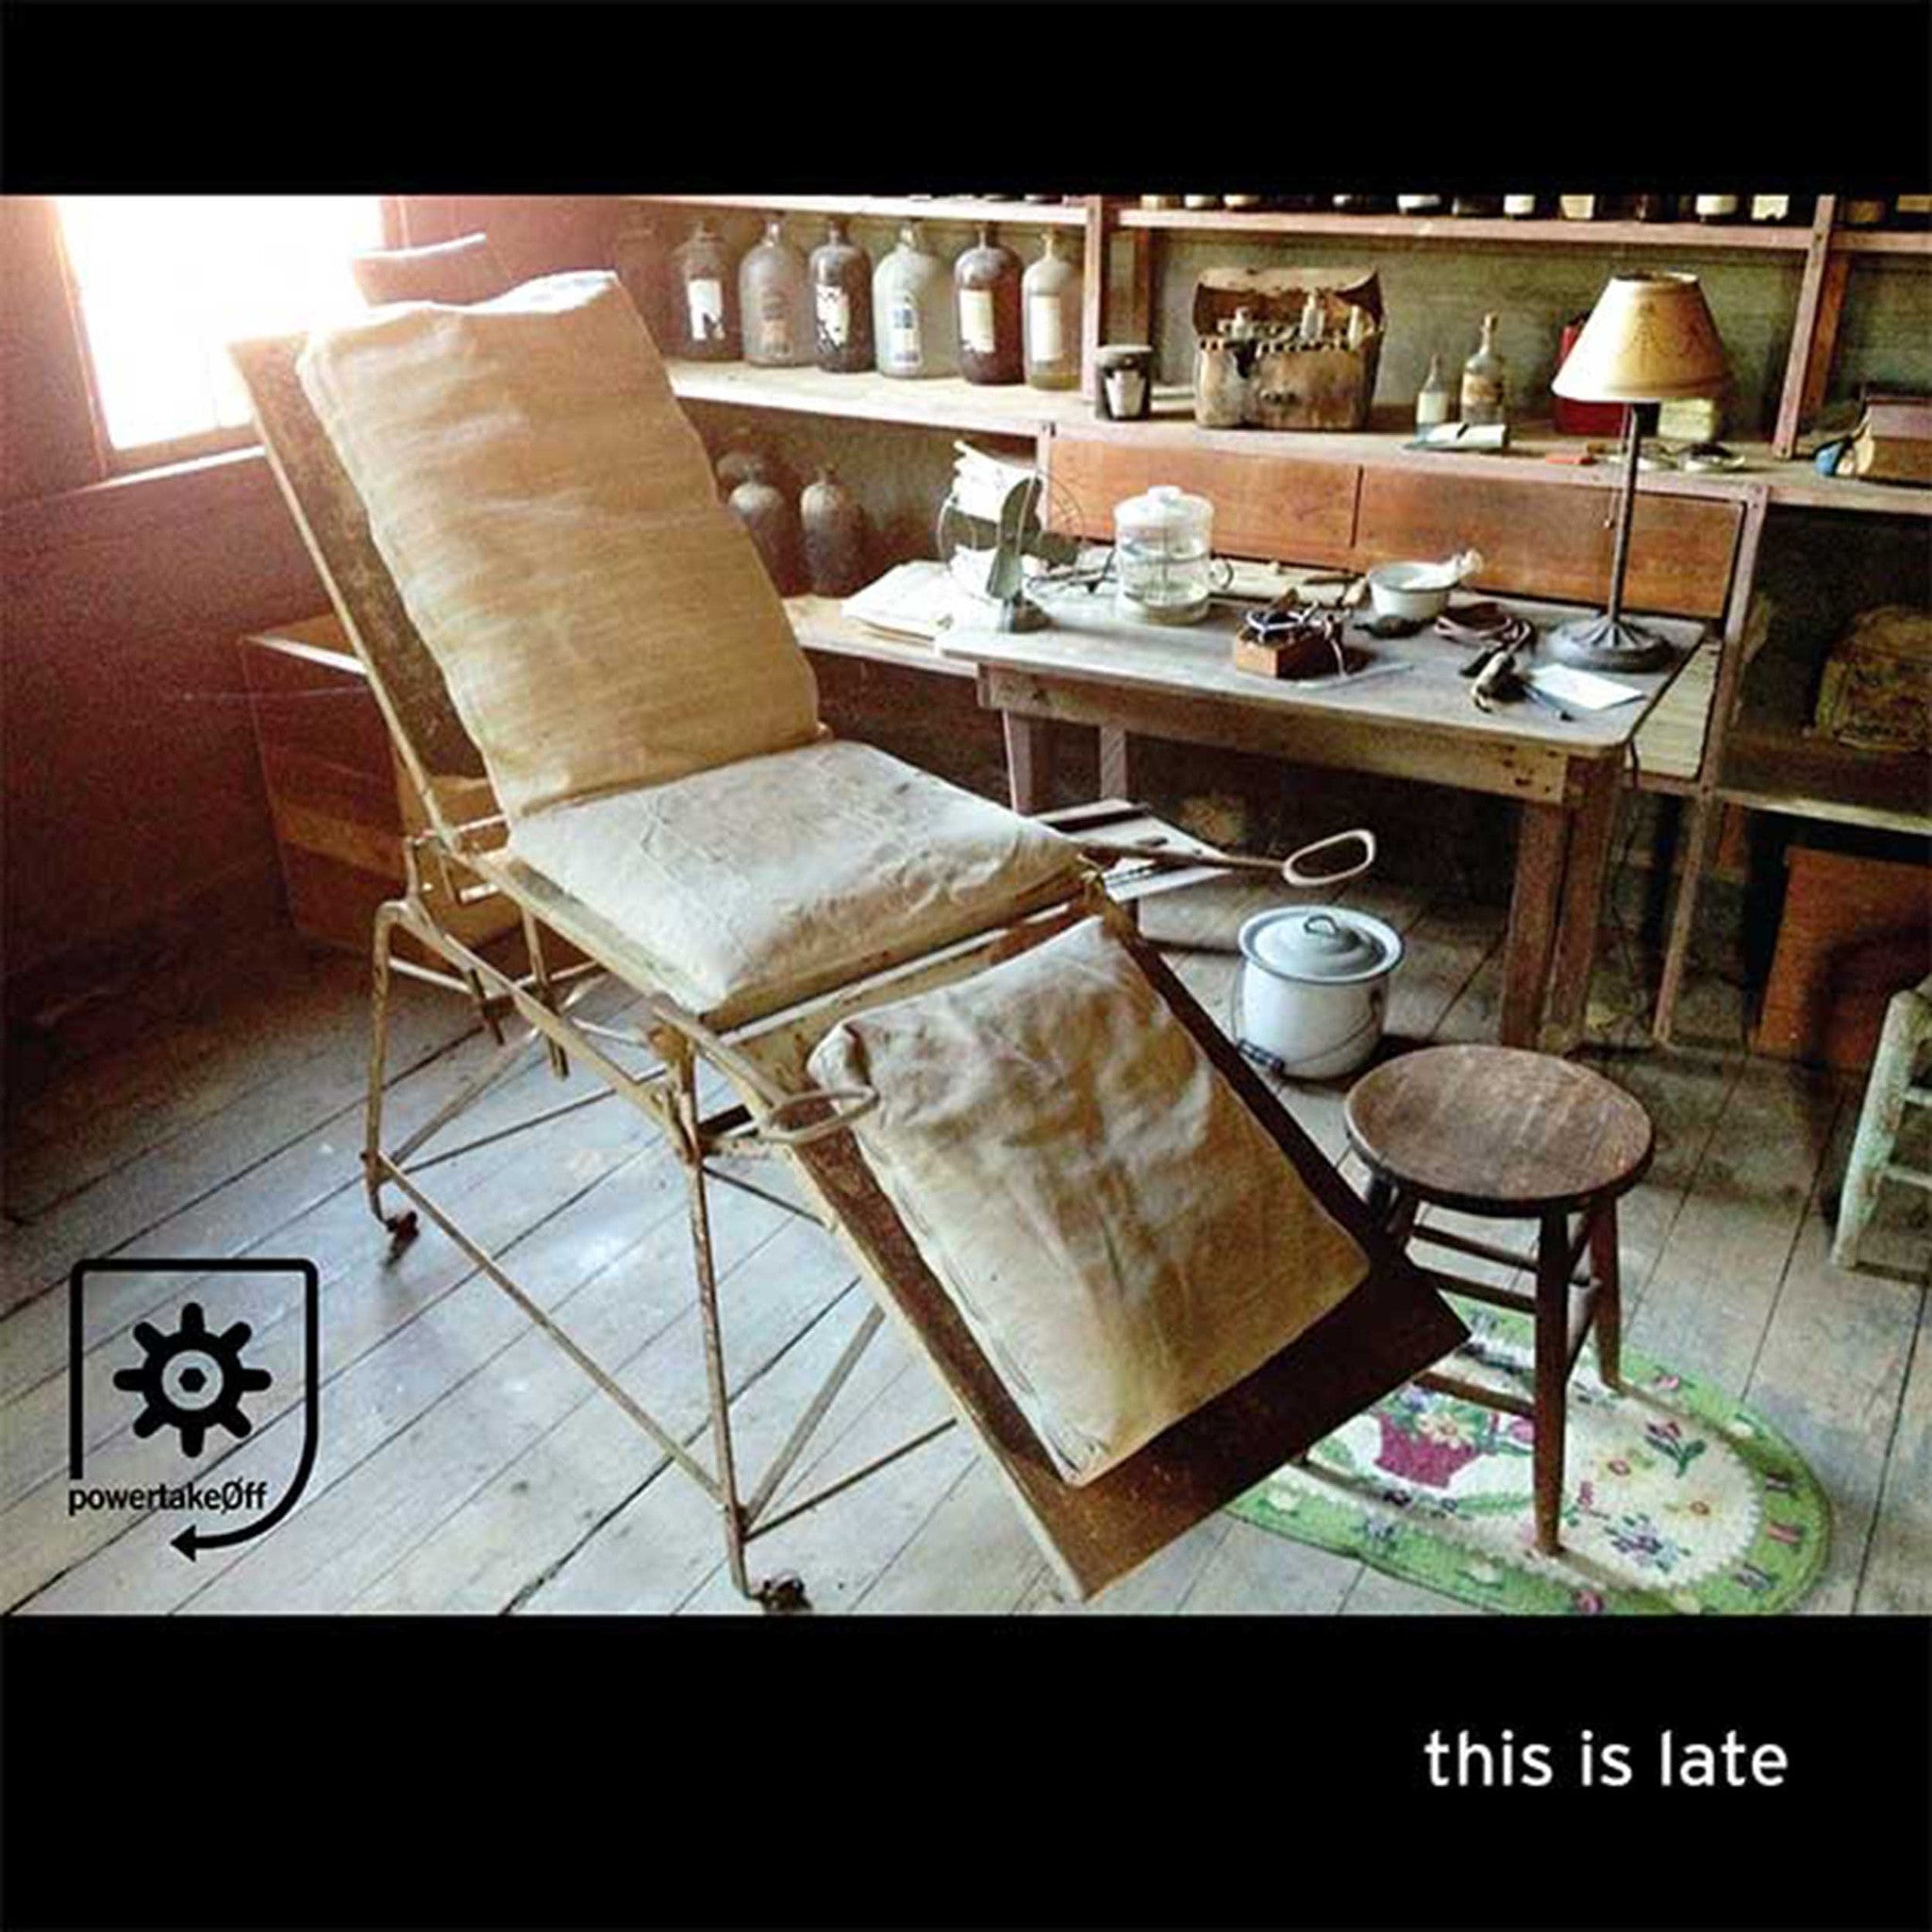 Power Take Off "This Is Late" LP